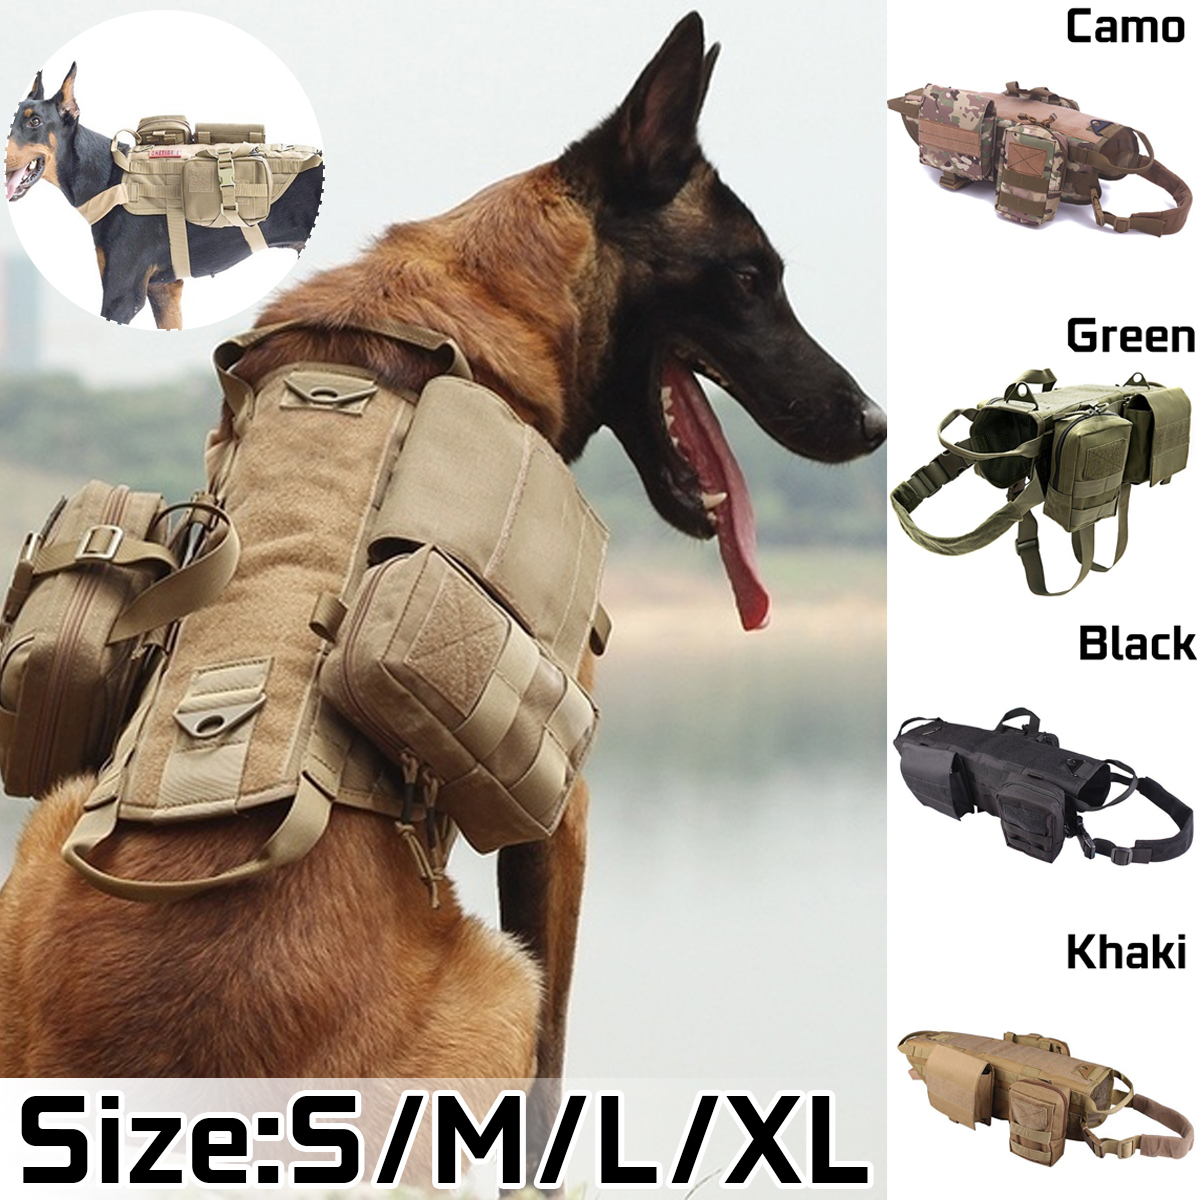 600D-Nylon-Tactical-Dog-Vests-Military-Dog-Clothes-with-Storage-Bag-Training-Load-Bearing-Harness-1817367-1